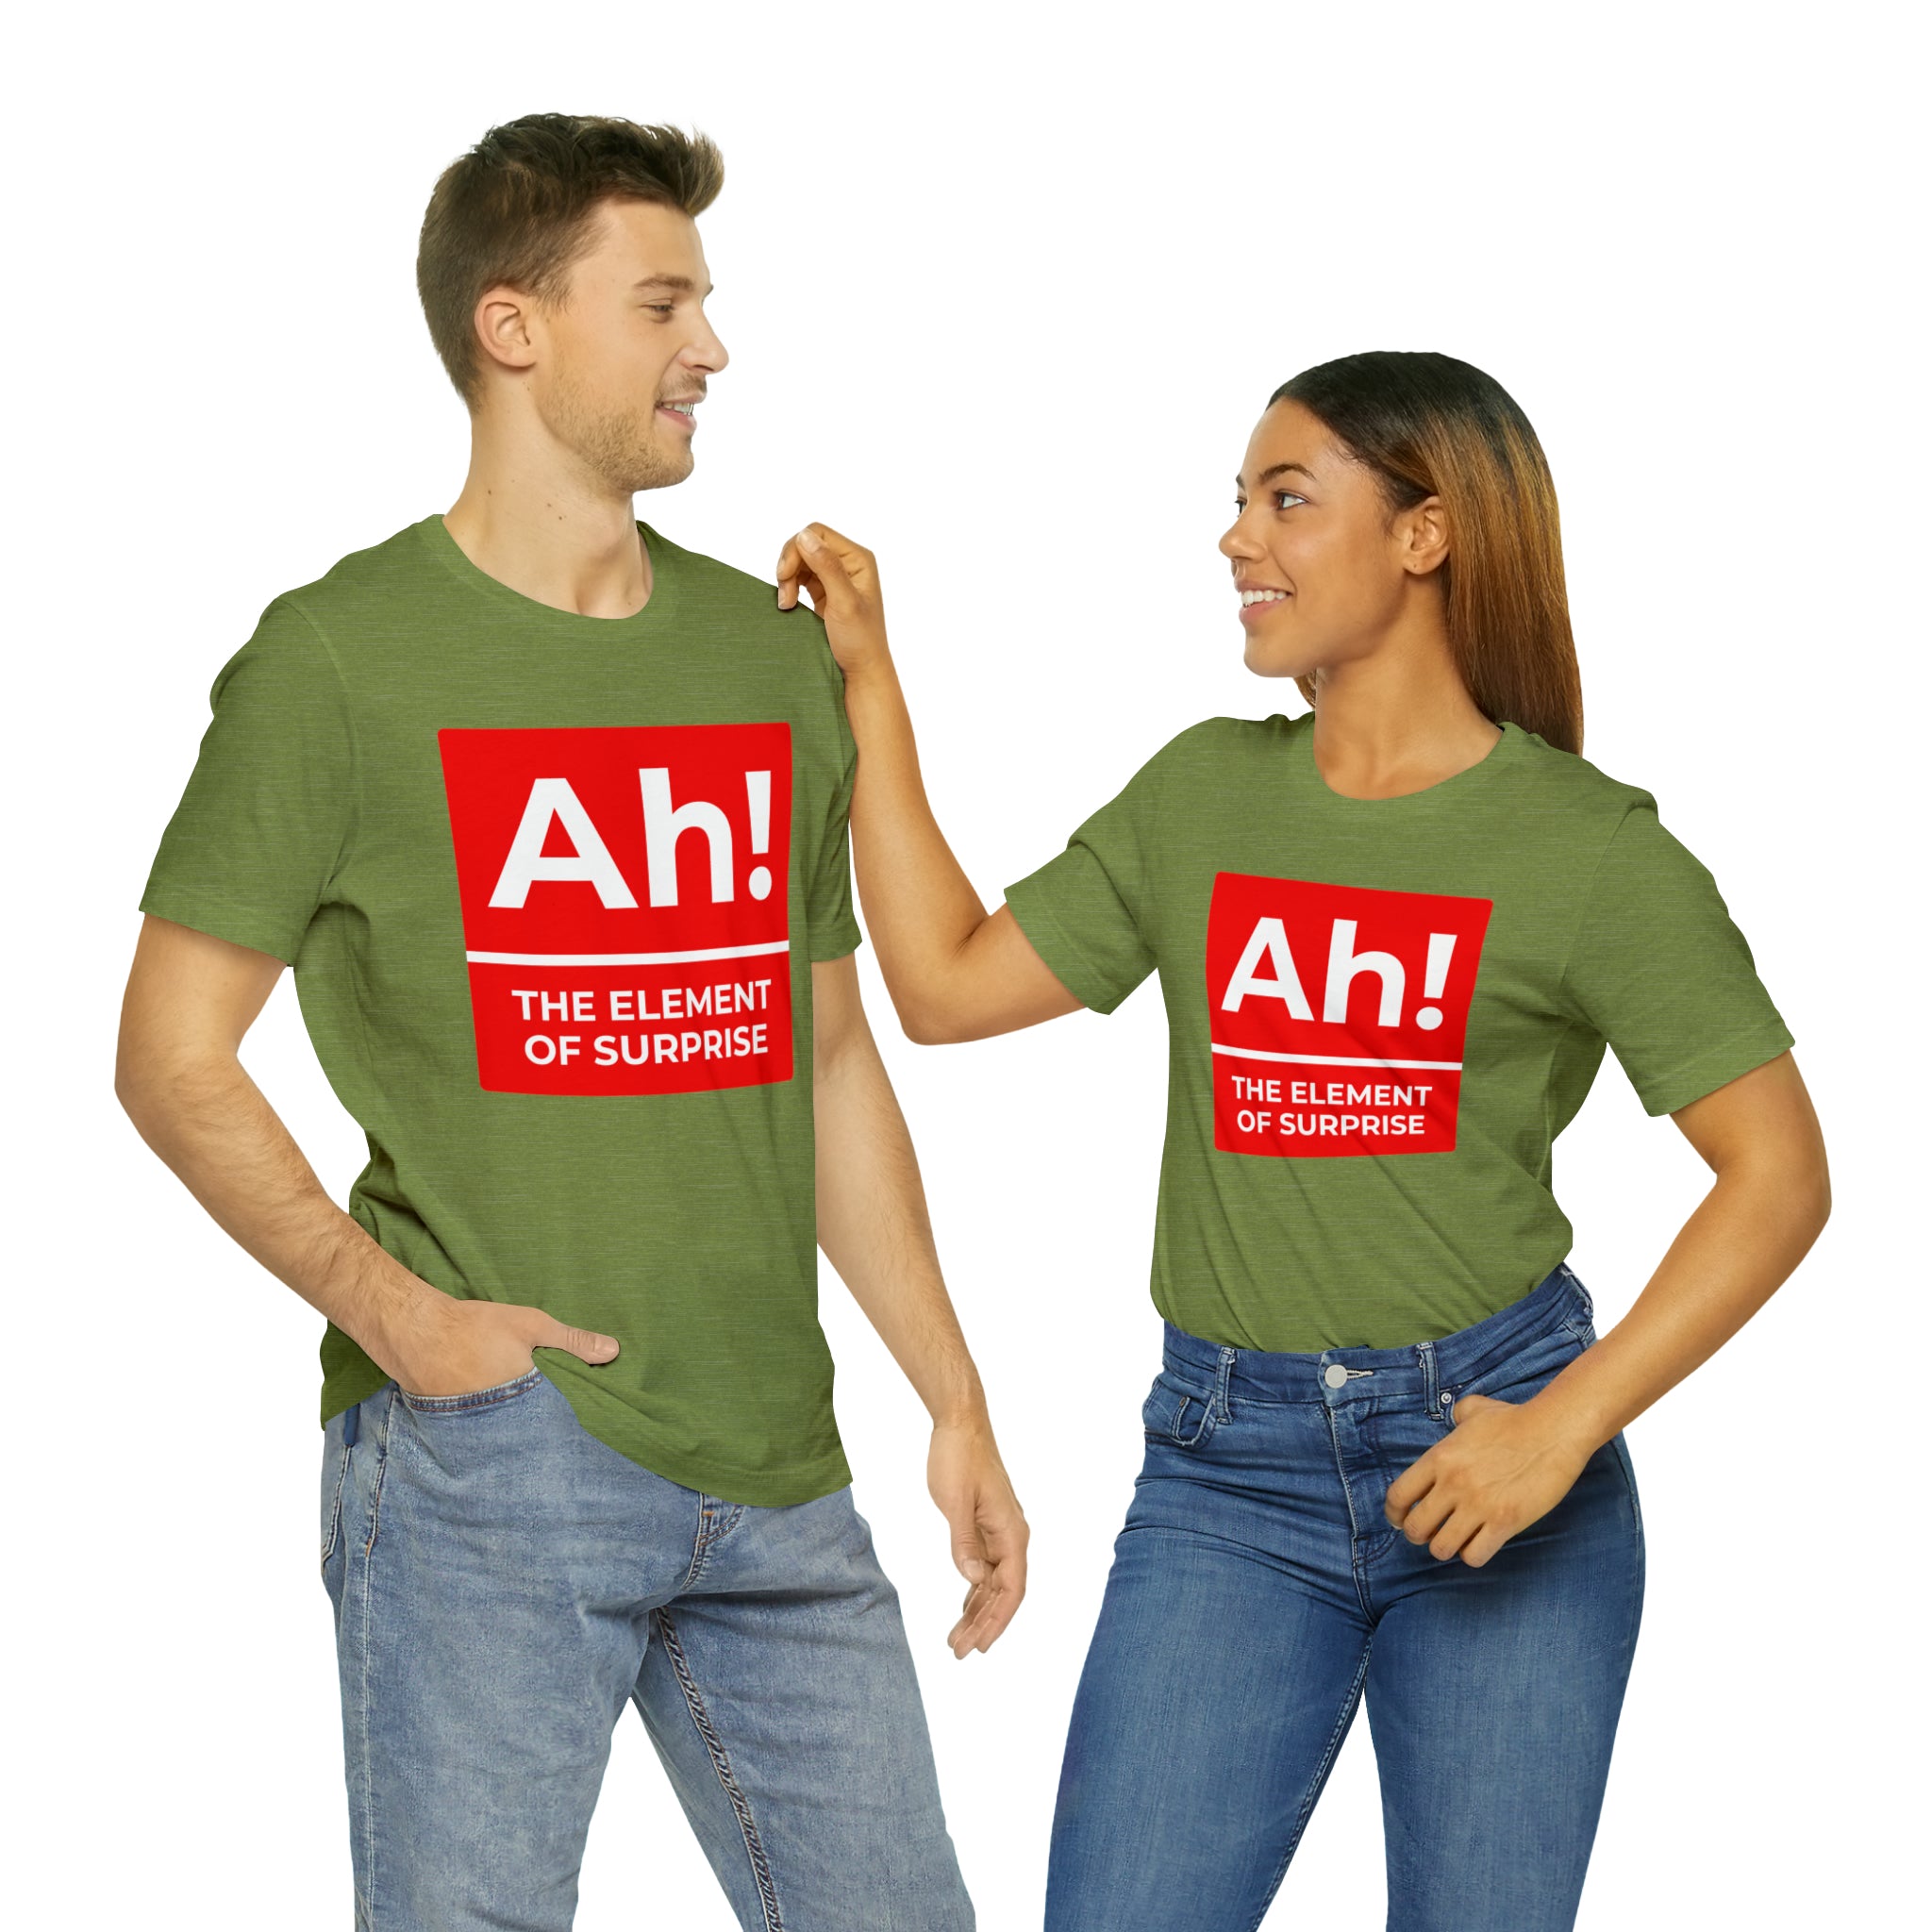 A man and woman wearing an Ah! the Element of Surprise T-shirt show their chemistry.